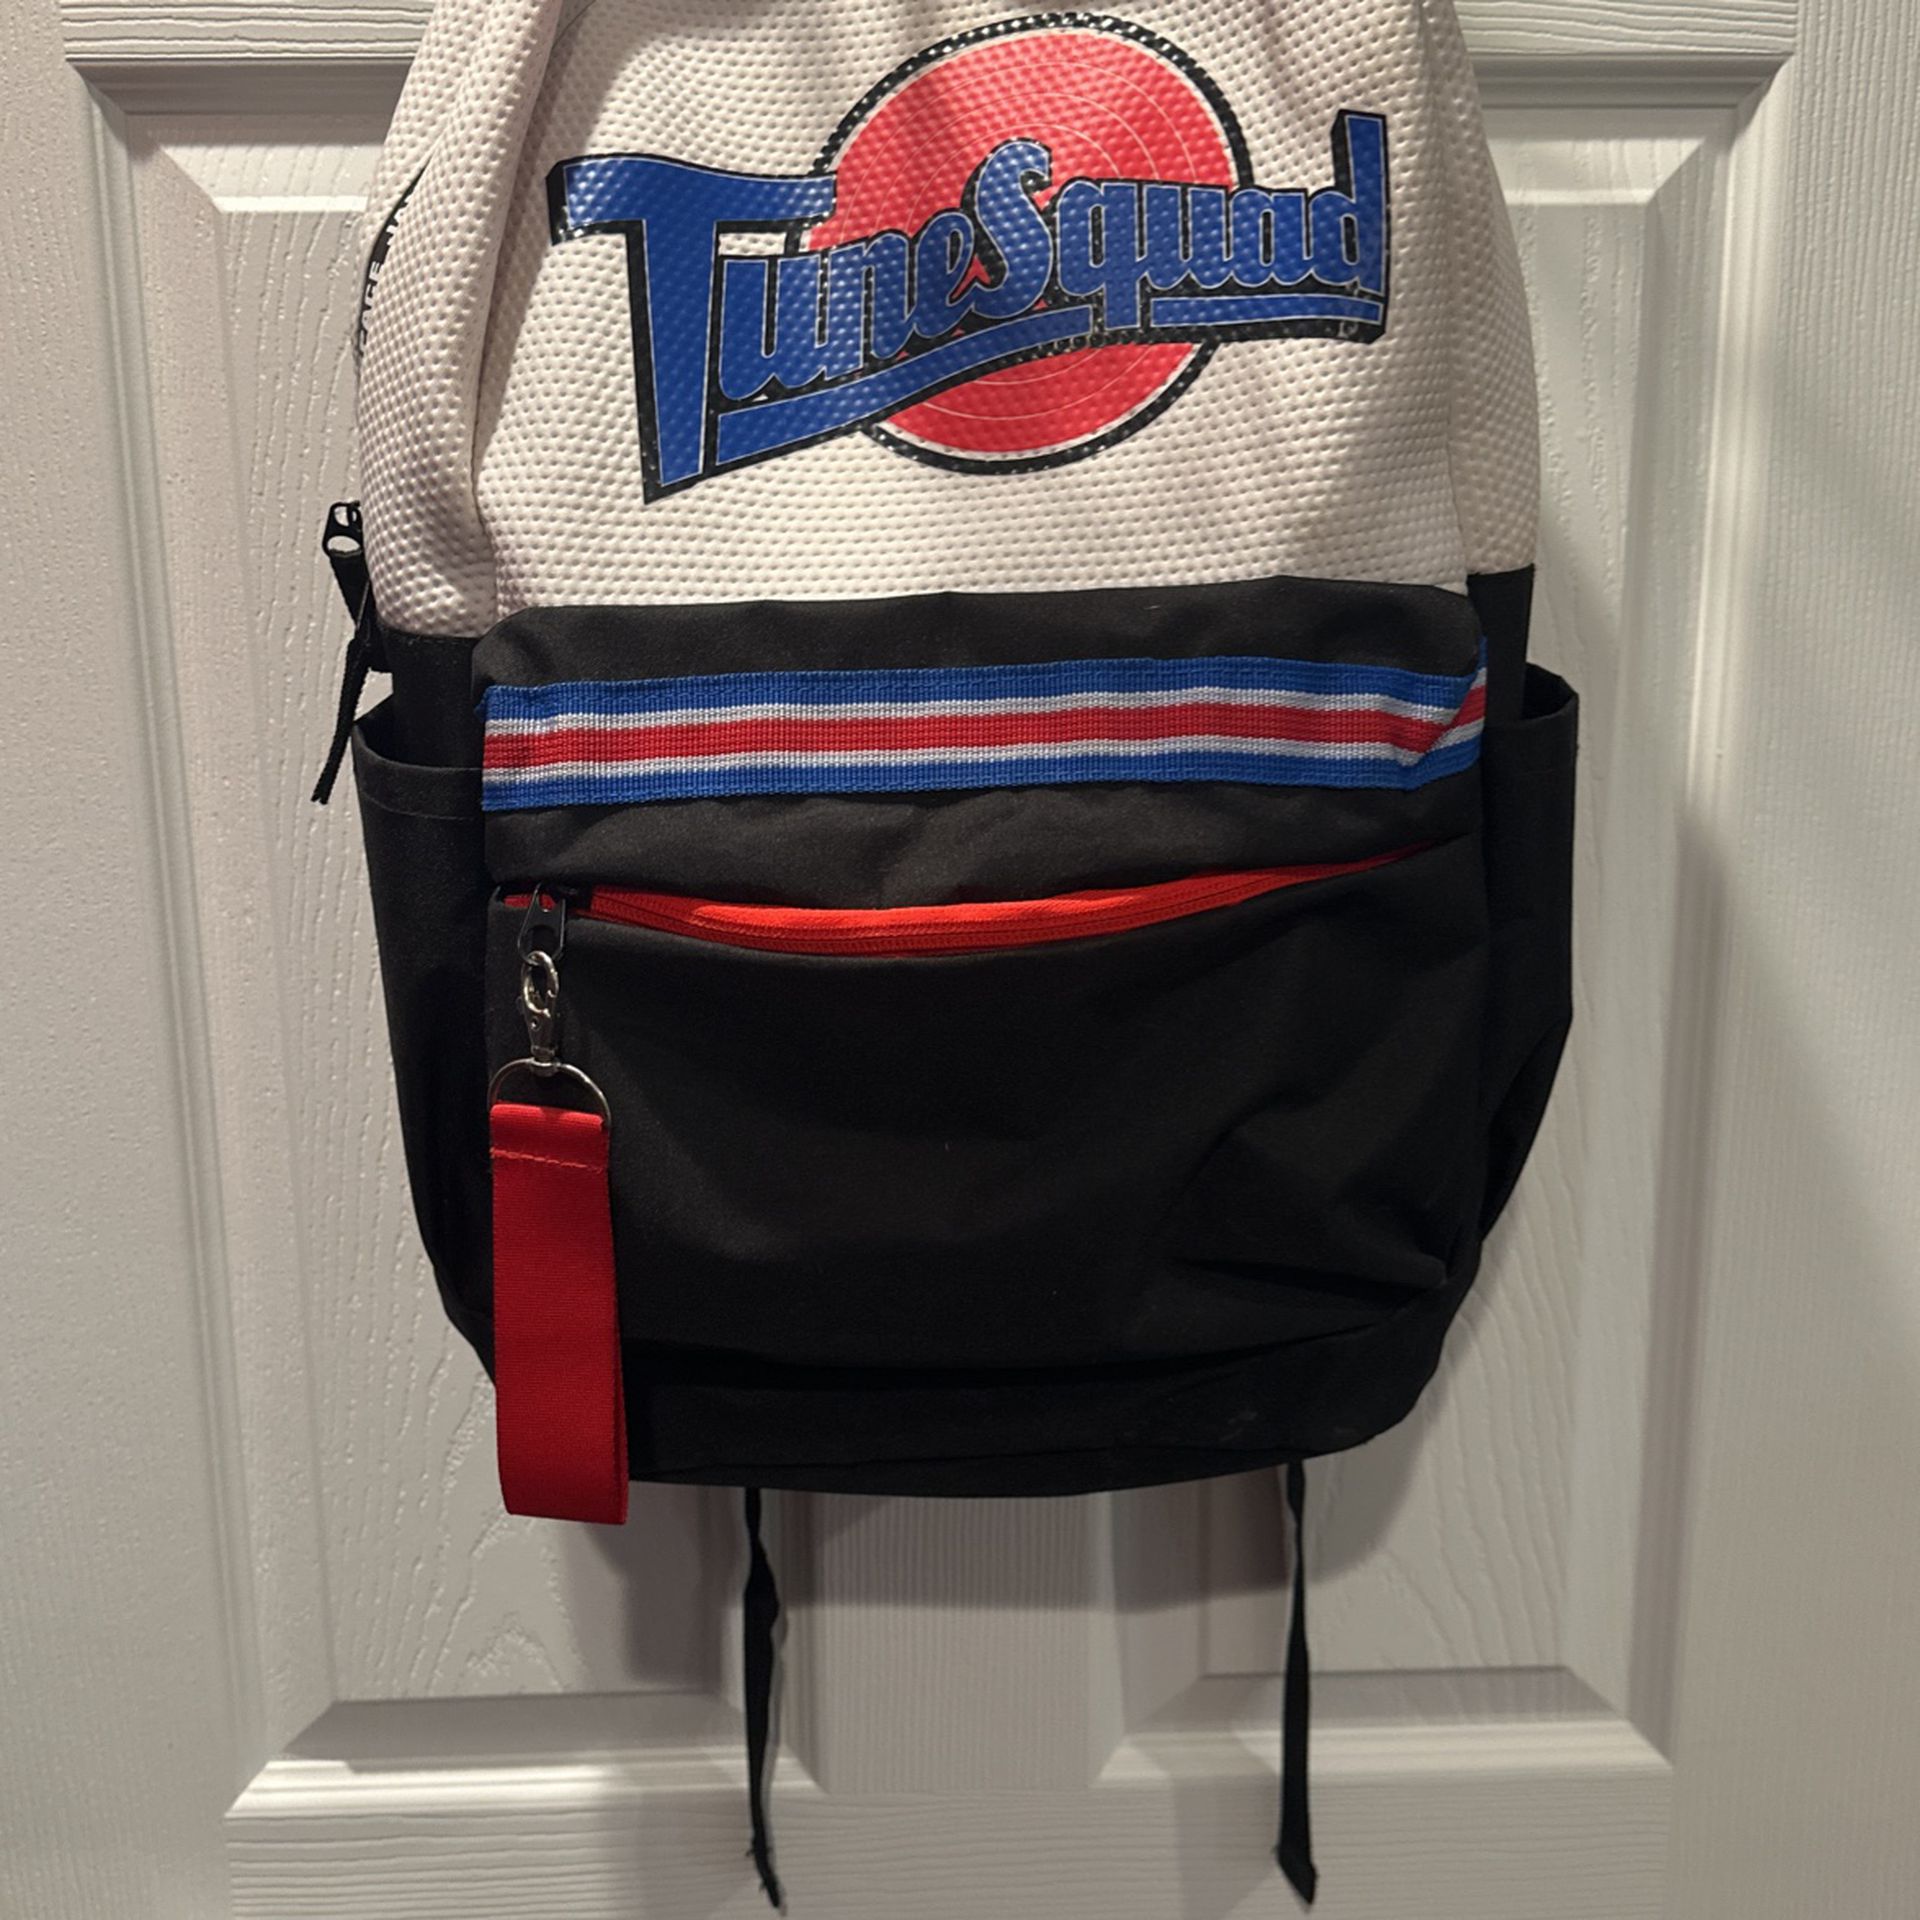 Tune-squad Backpack 